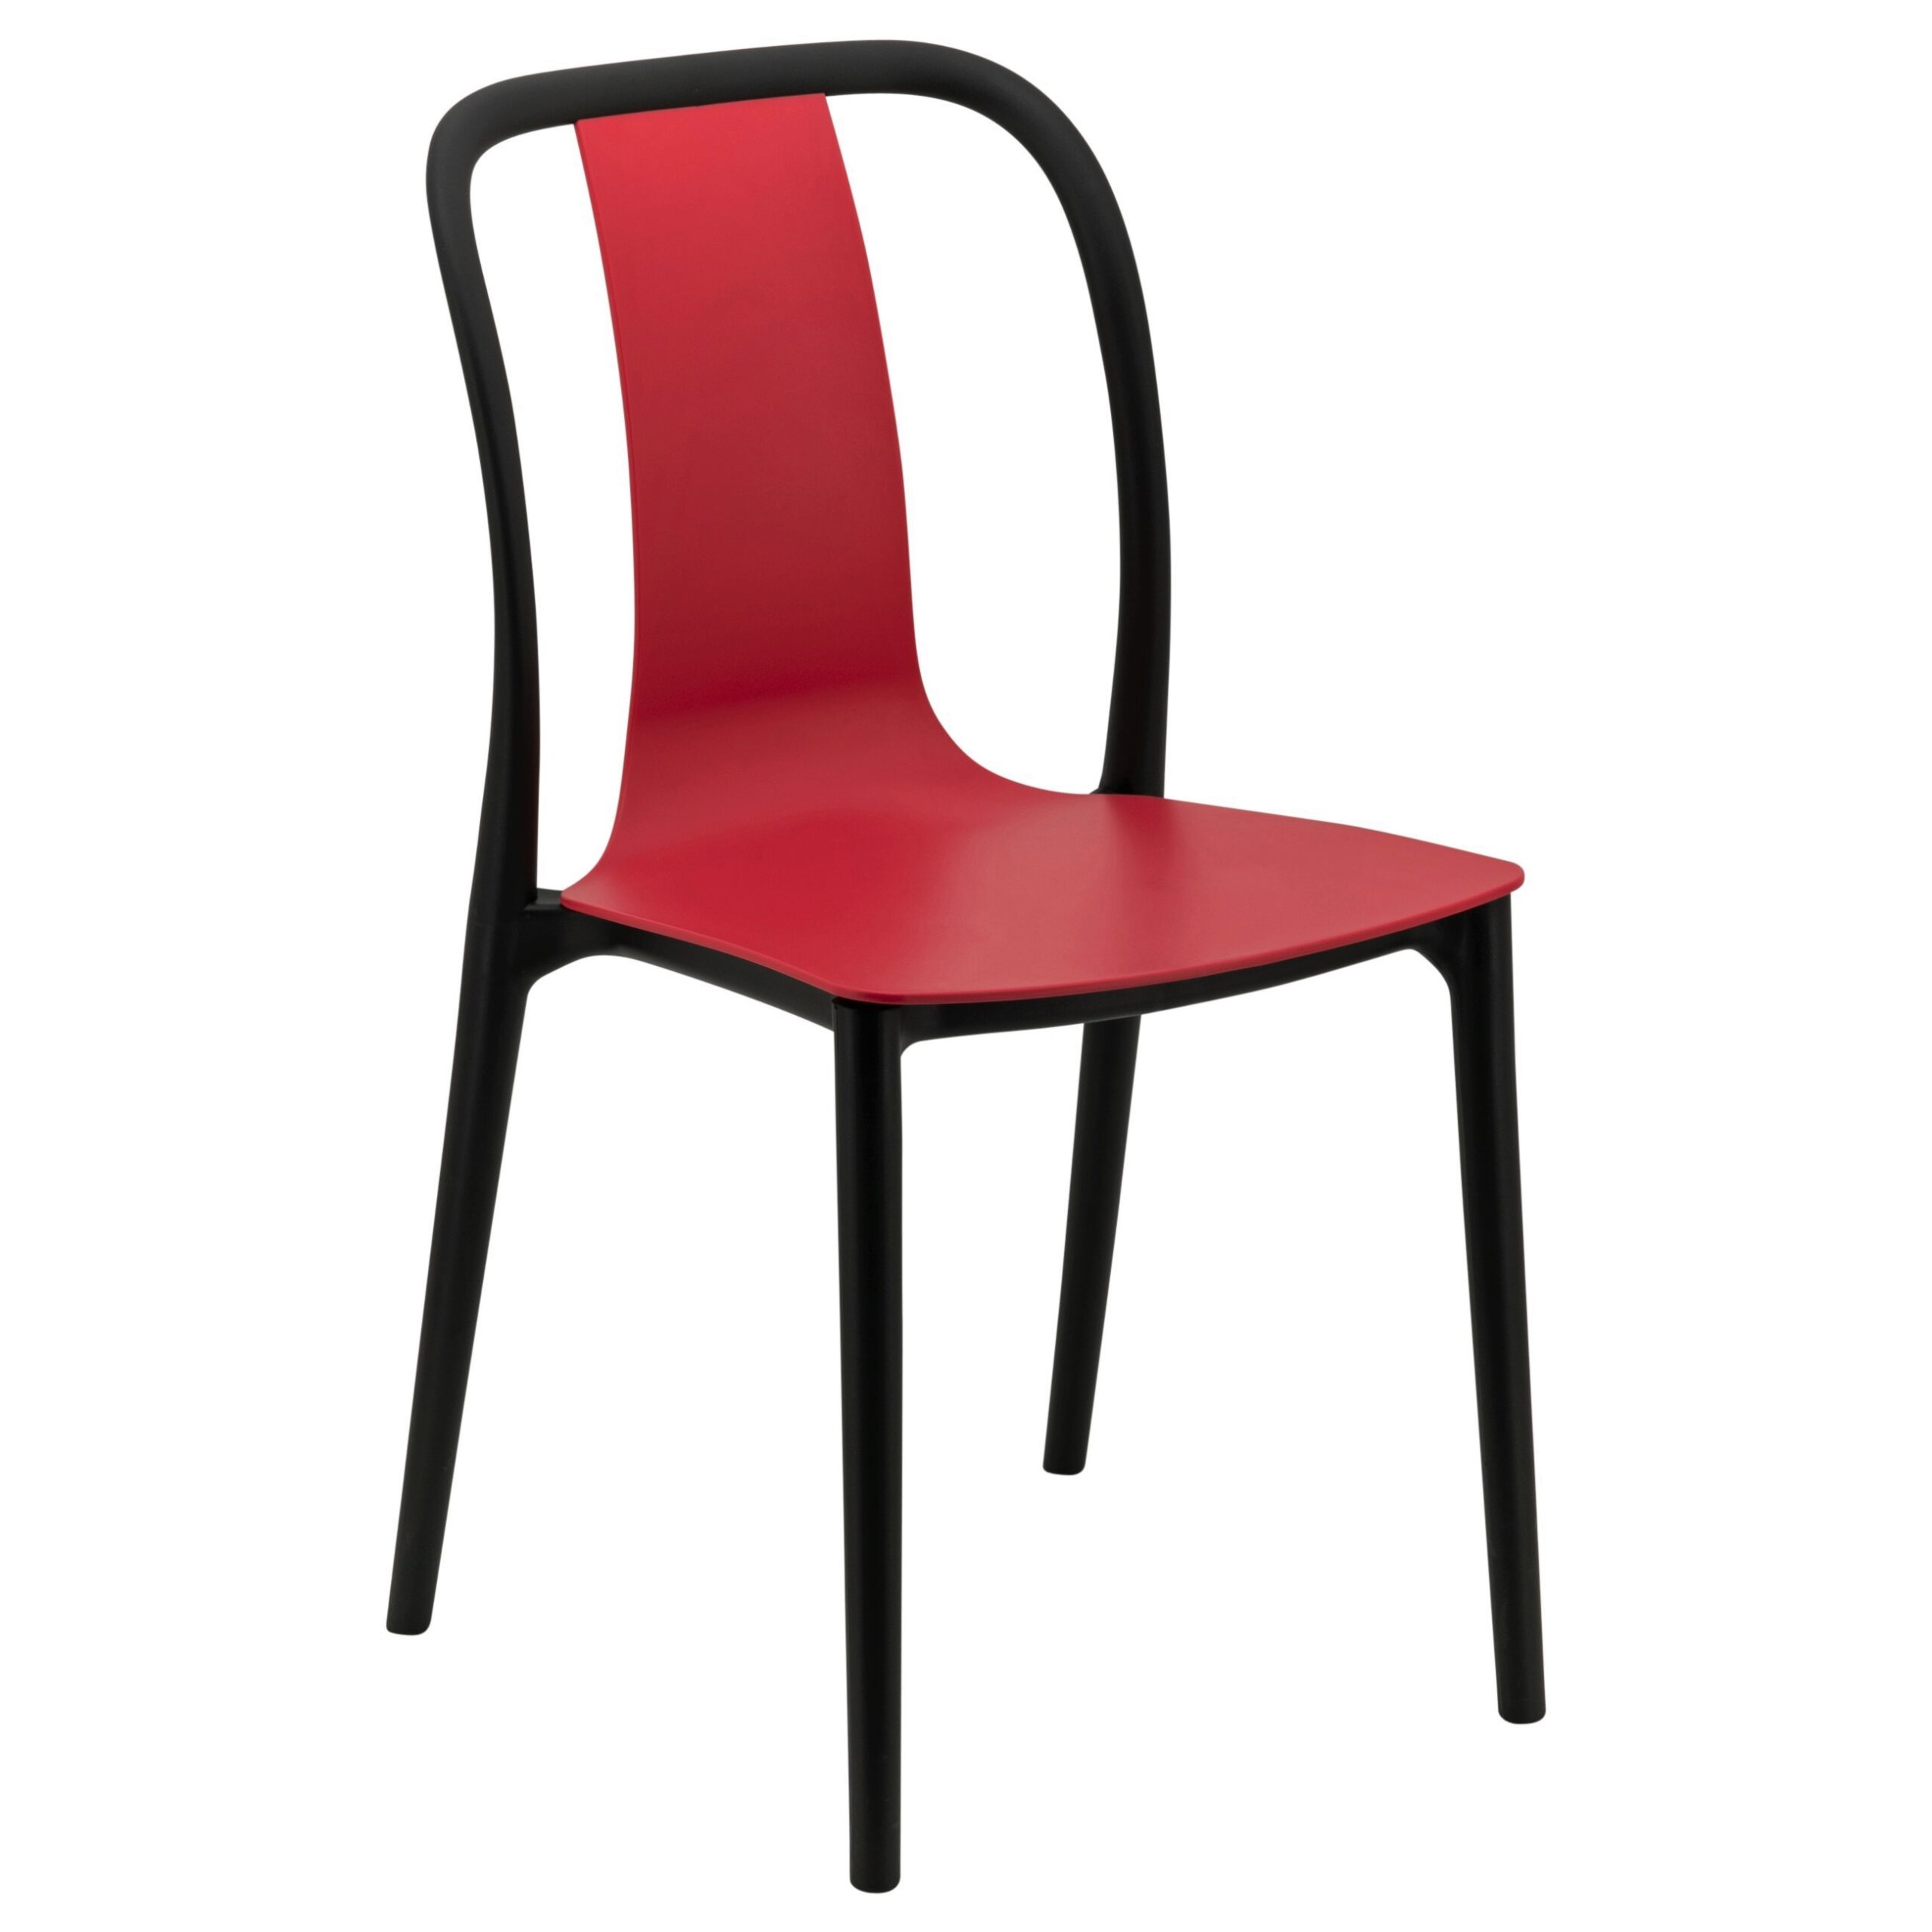 Emma Chair in Black and Ruby